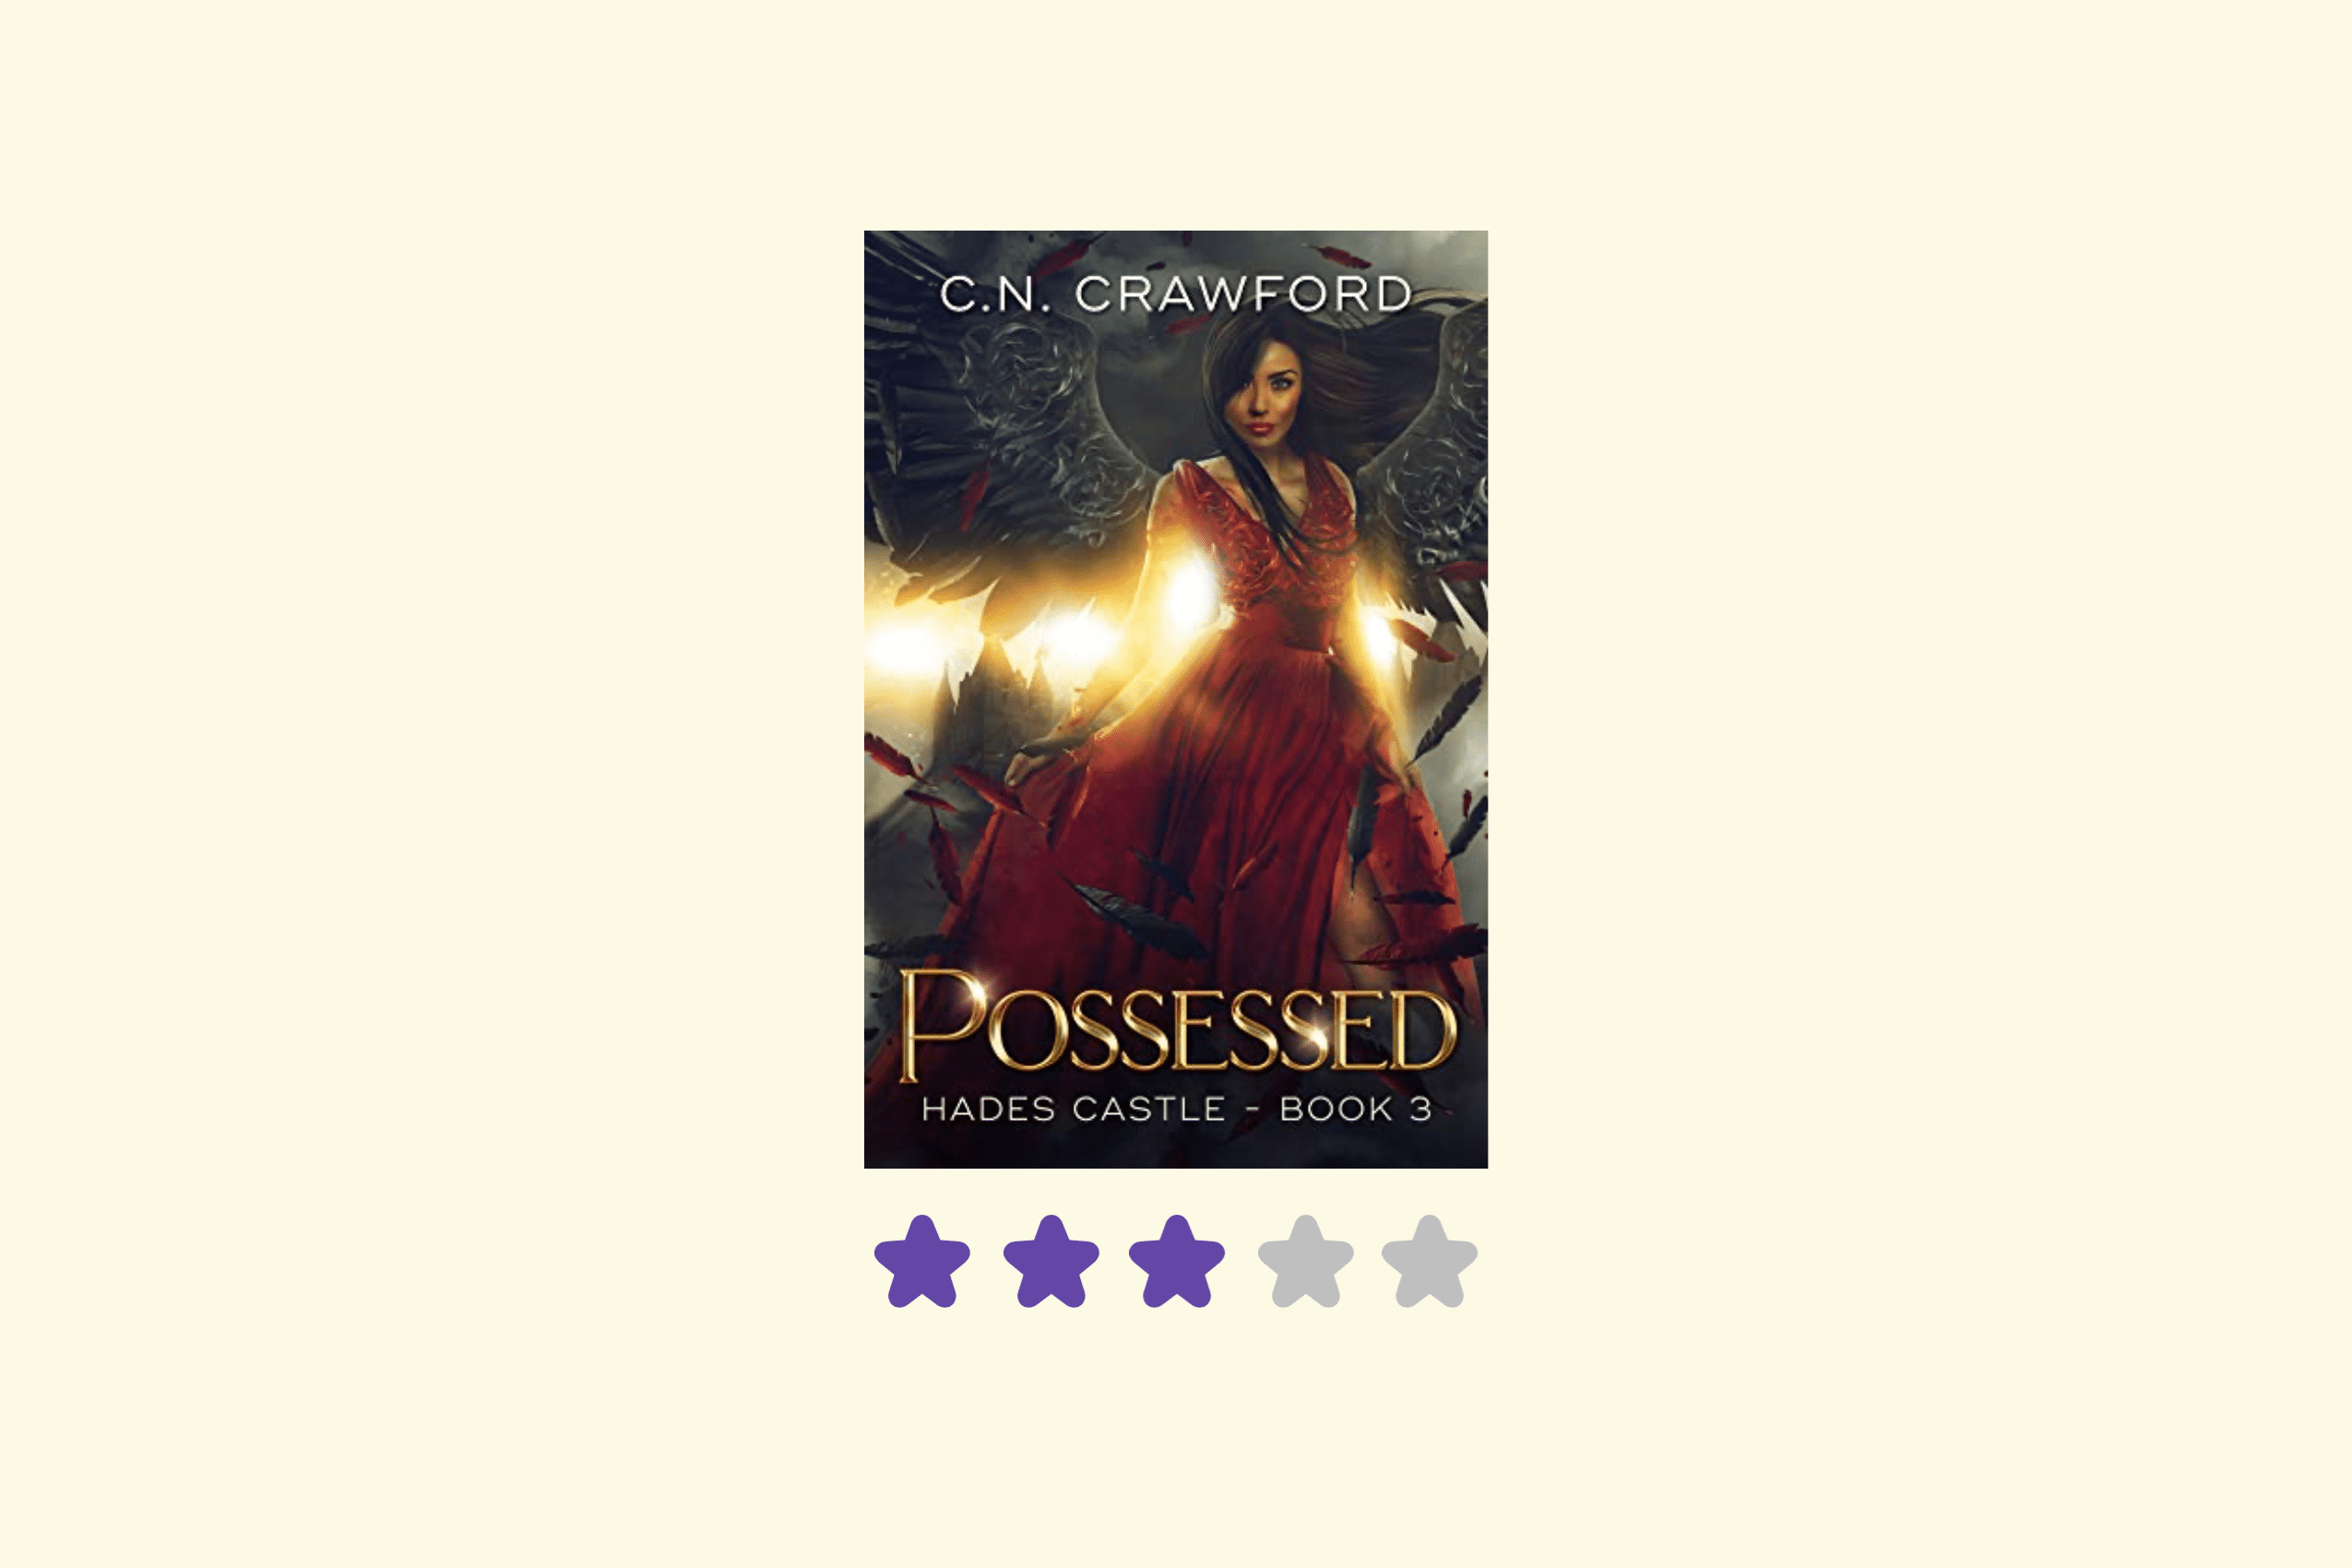 Possessed (Hades Castle Trilogy #3) by C.N. Crawford